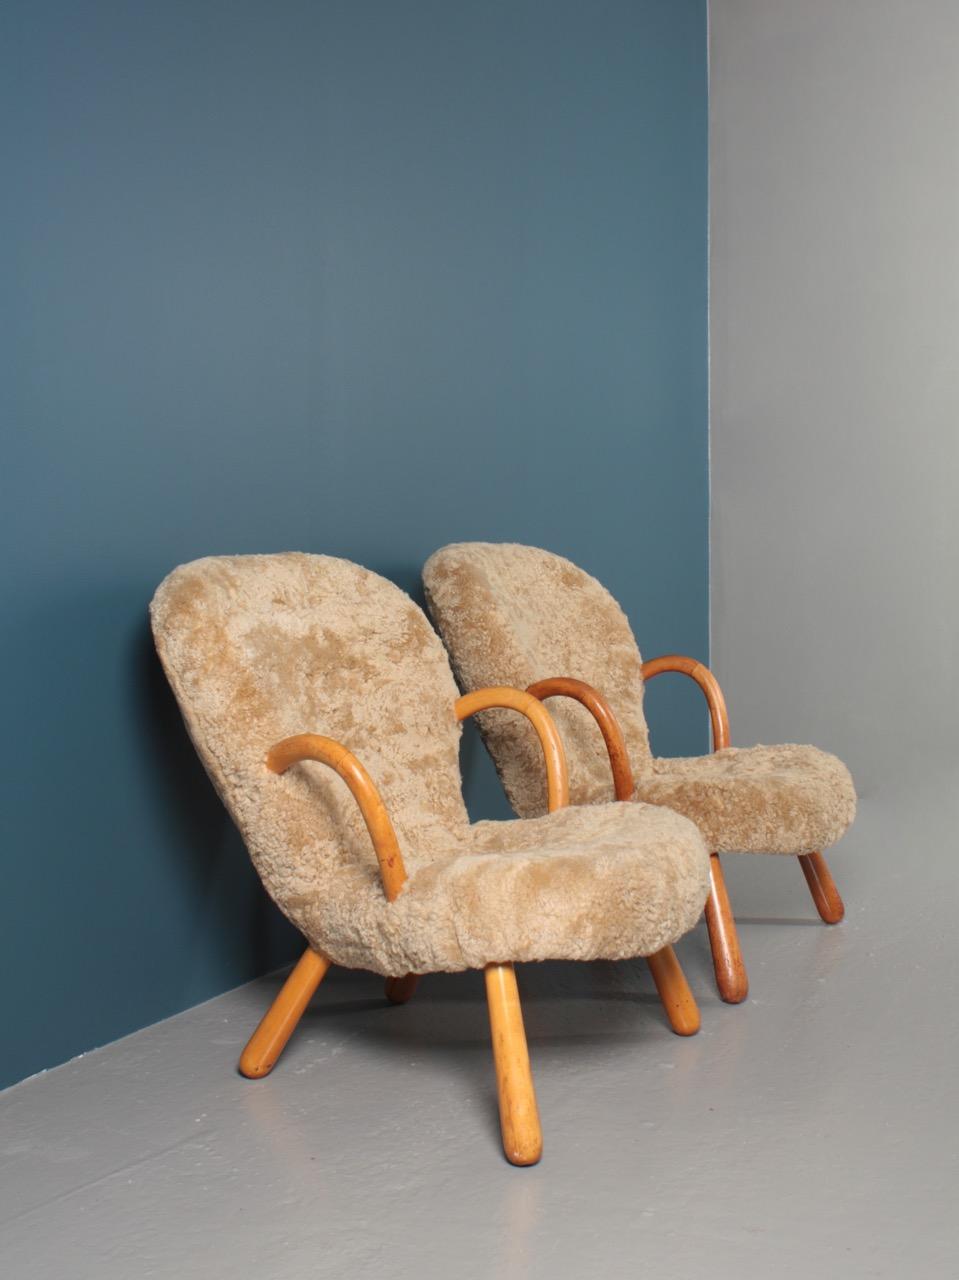 Pair of lounge chairs with round armrests and legs of patinated beech. Seat and back upholstered with sheepskin. Designed by Danish architect Philip Arctander for Nordisk Staal- & Møbel Central in 1944. This pair is made in the 1950s and are in